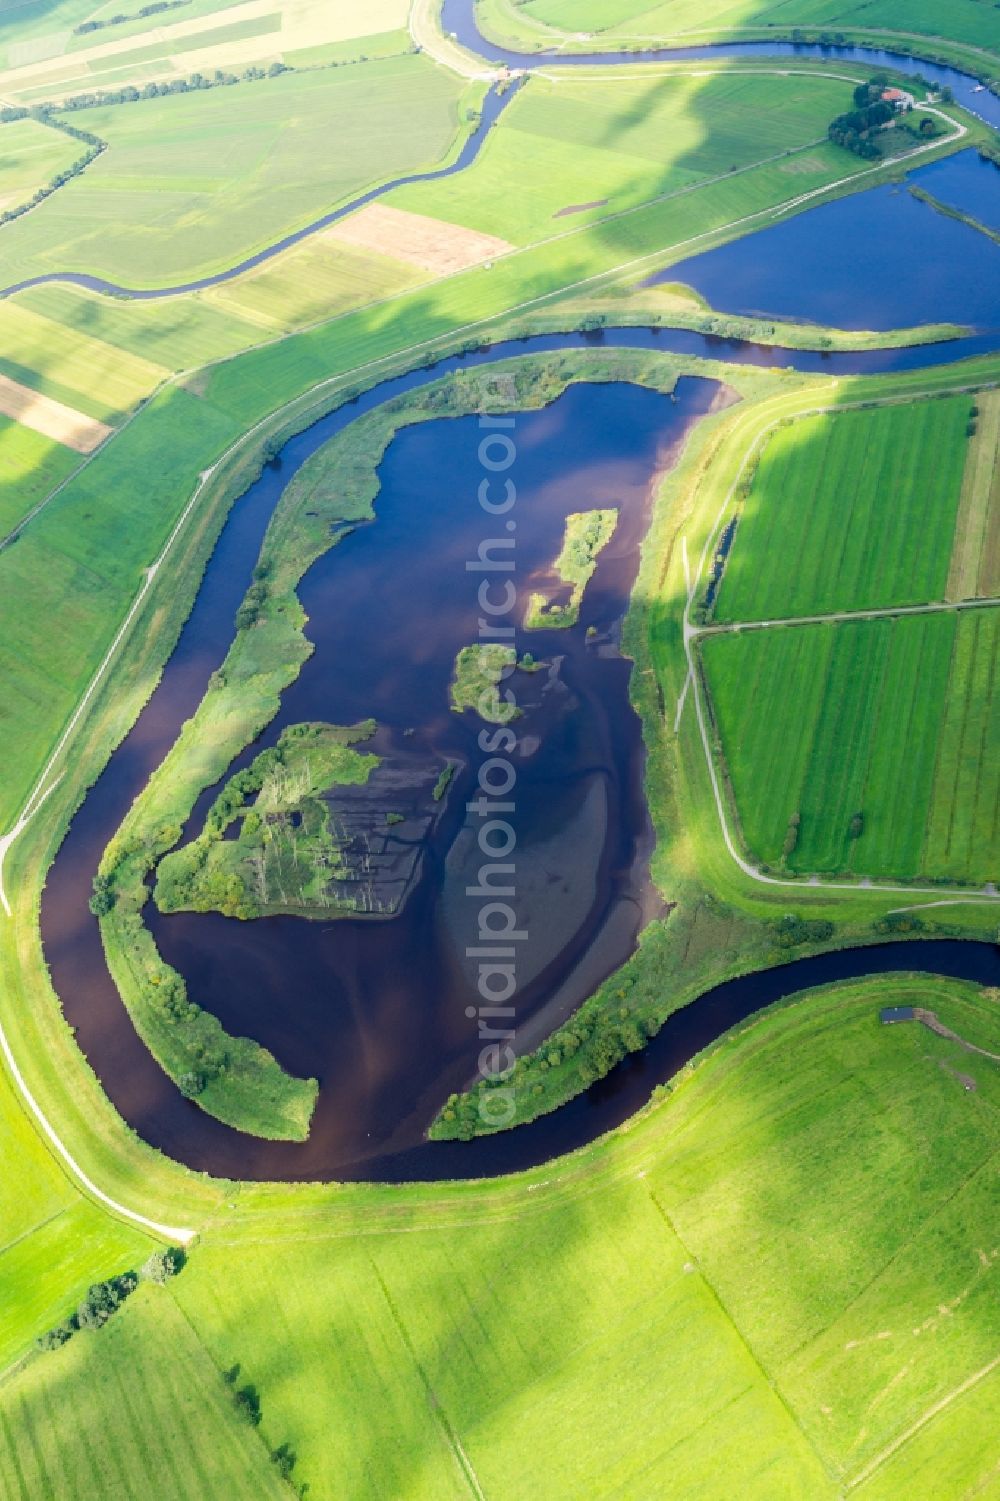 Estorf from above - Waterside of the floodwater meadows on the river Oste near Estorf in the state of Lower Saxony, Germany